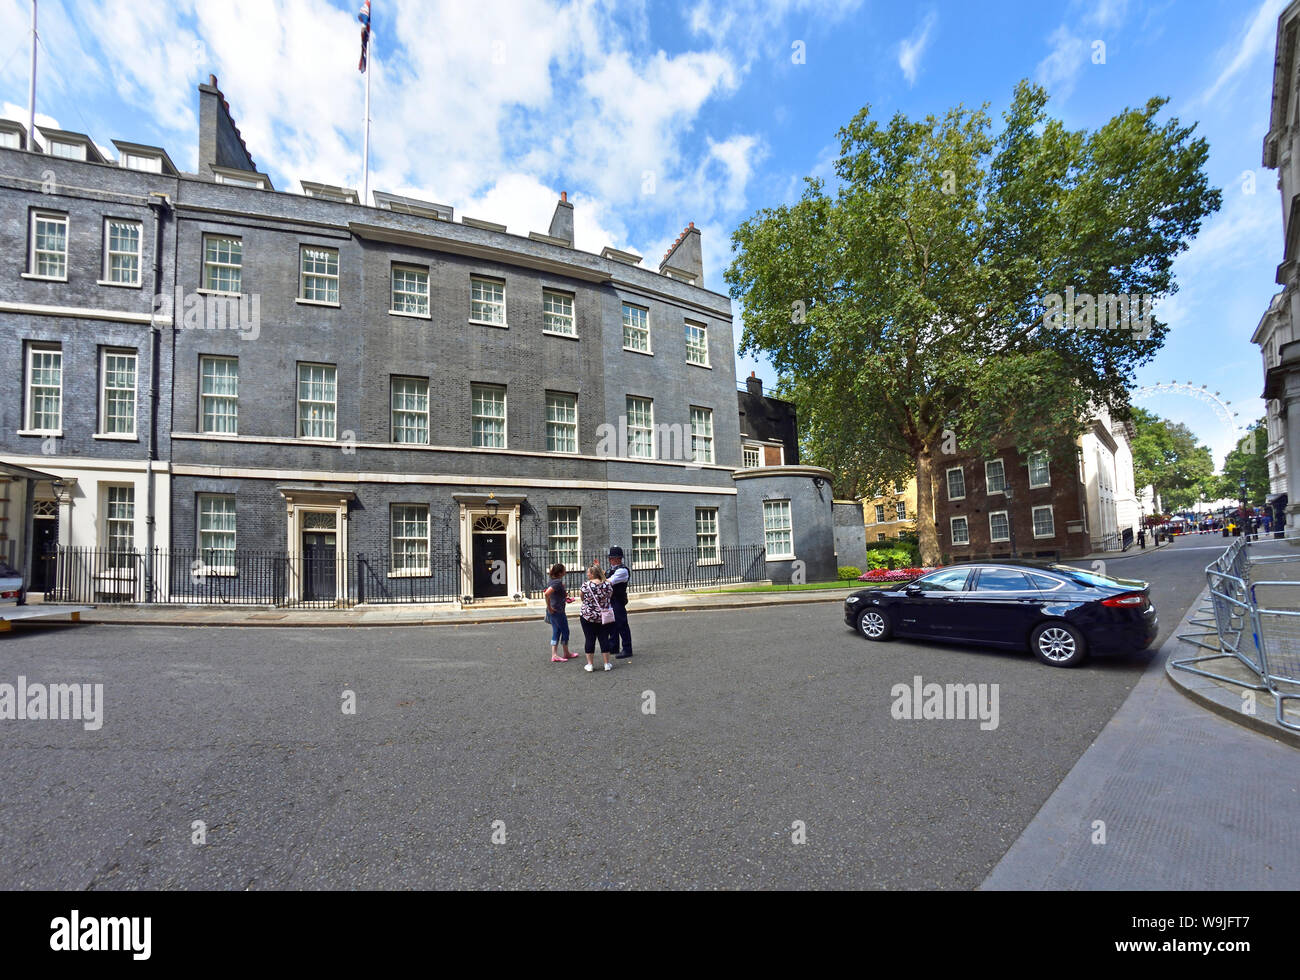 Londres, Angleterre, Royaume-Uni. Downing Street - fisheye grand angle de vue. Banque D'Images